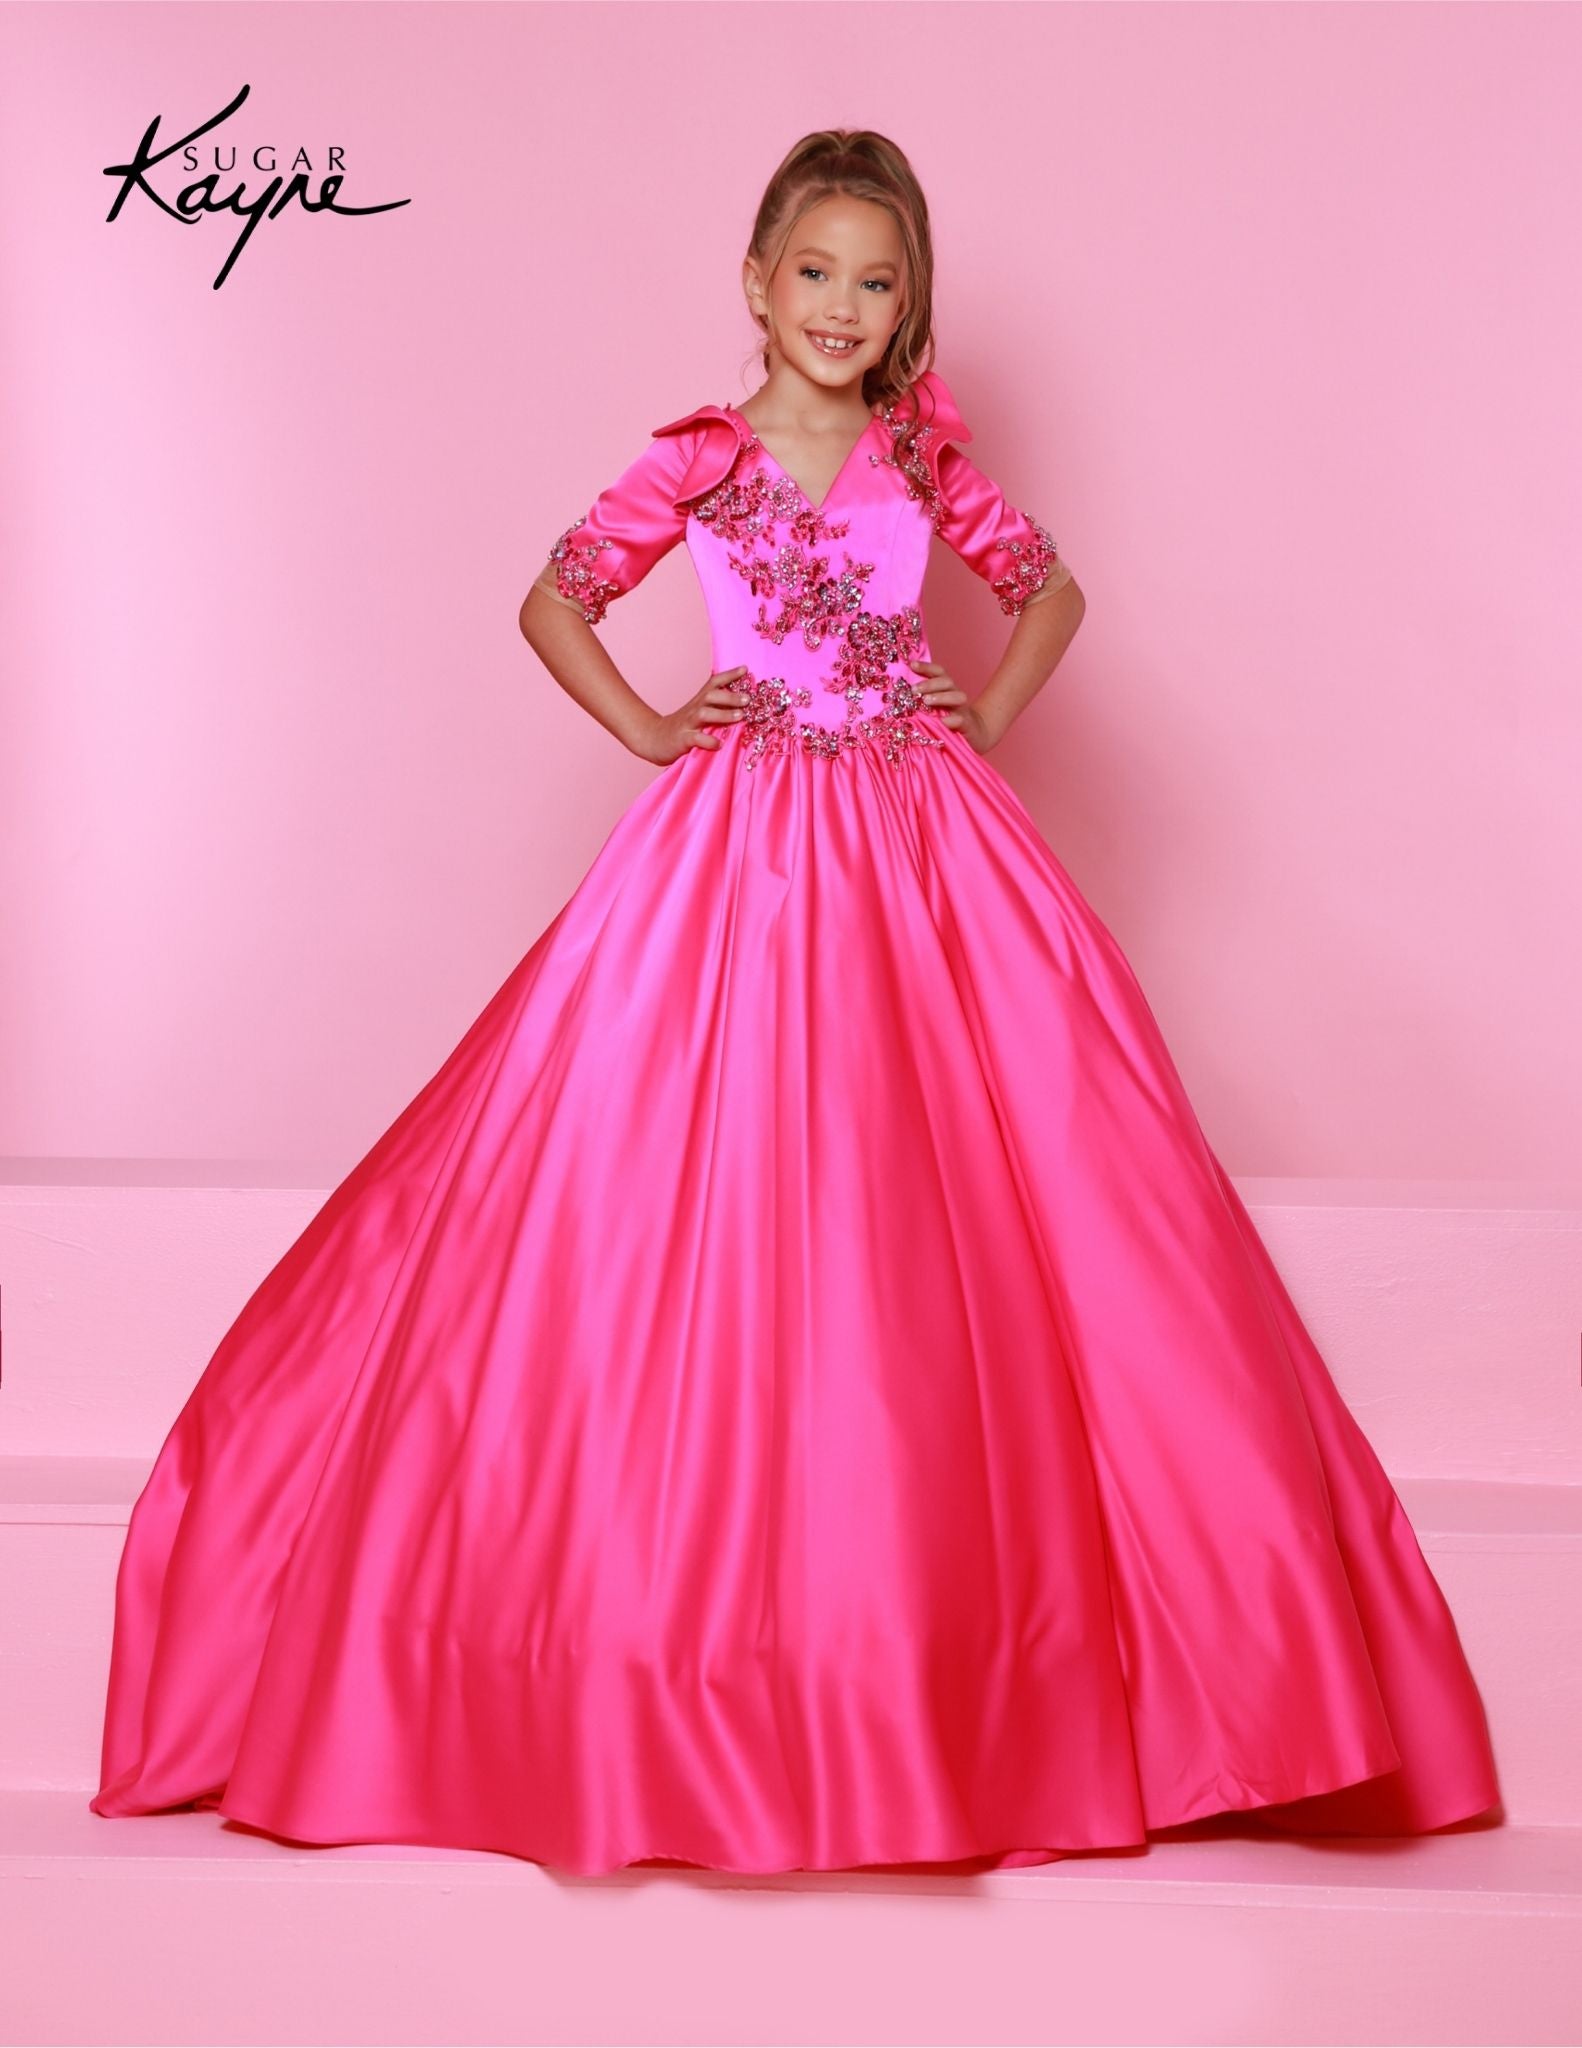 This beautiful Sugar Kayne C343 Pageant Dress offers a stunning A-line silhouette with a unique plunging V neckline adorned with dazzling crystals. Crafted from luxurious satin fabric, this dress is perfect for the little girl who wants to shine. Embrace the glamour of a storybook princess. Our Stretch Crepe Back Satin ballgown is sure to radiate grace of a true princess!